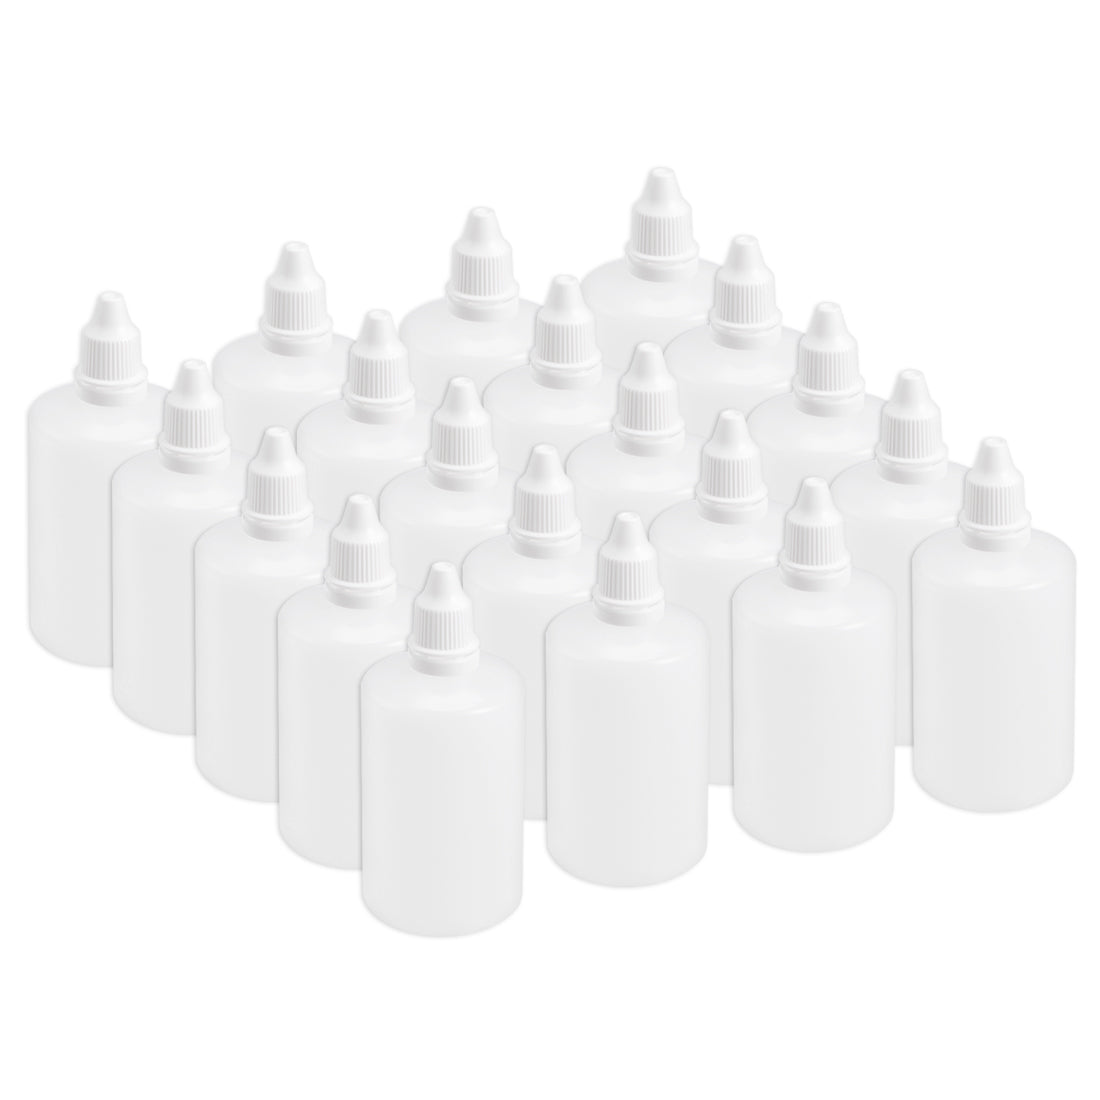 uxcell Uxcell 100ml/3.4 oz Empty Squeezable Dropper Bottle 20pcs